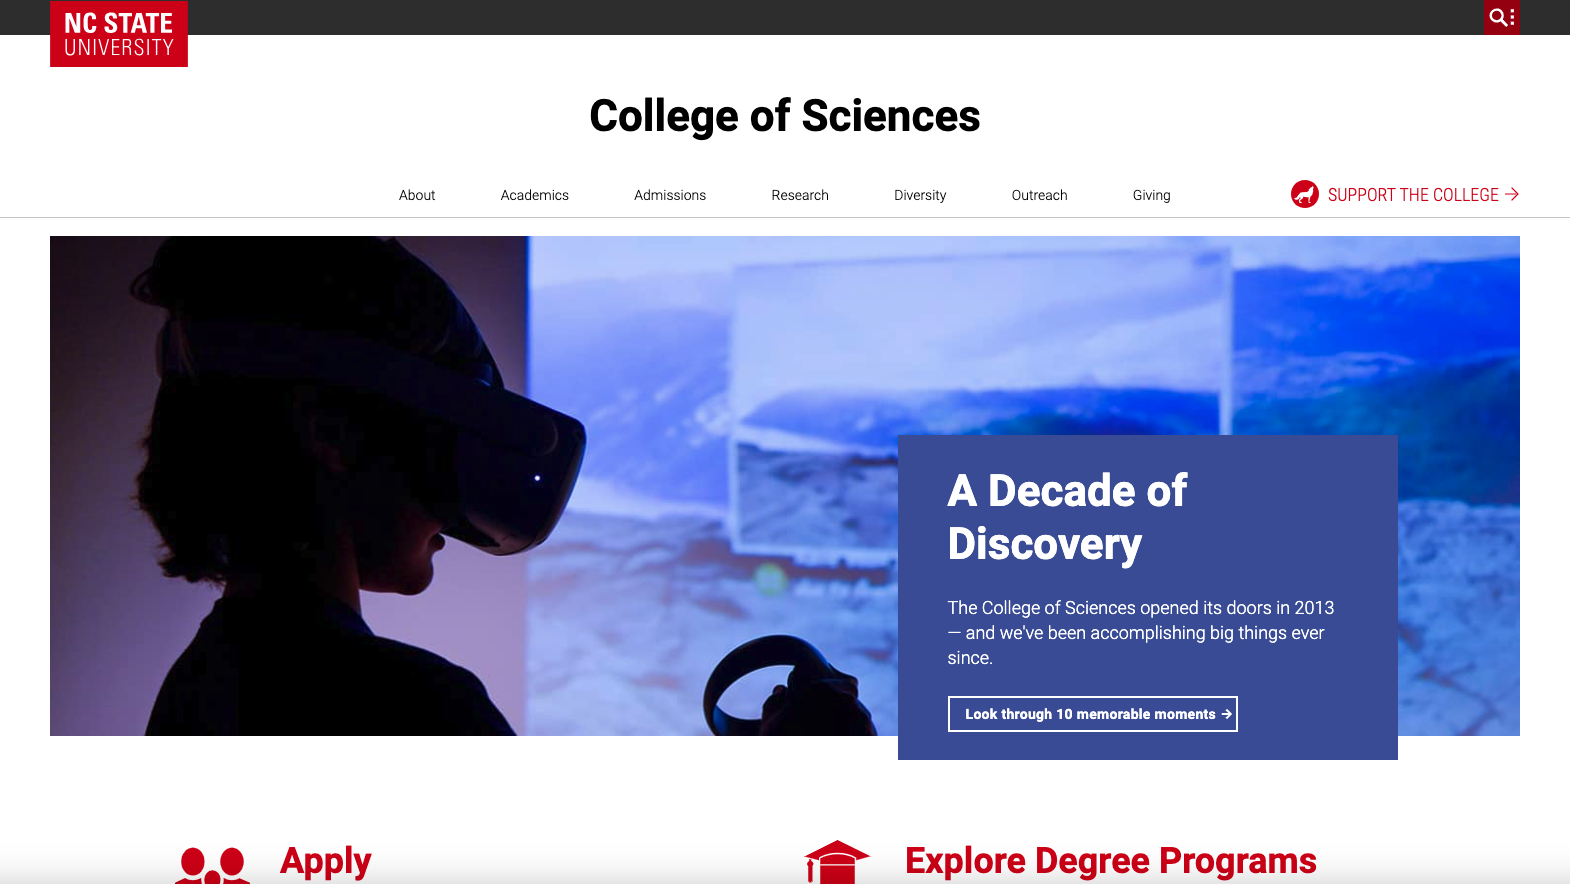 The homepage of the College of Sciences website.